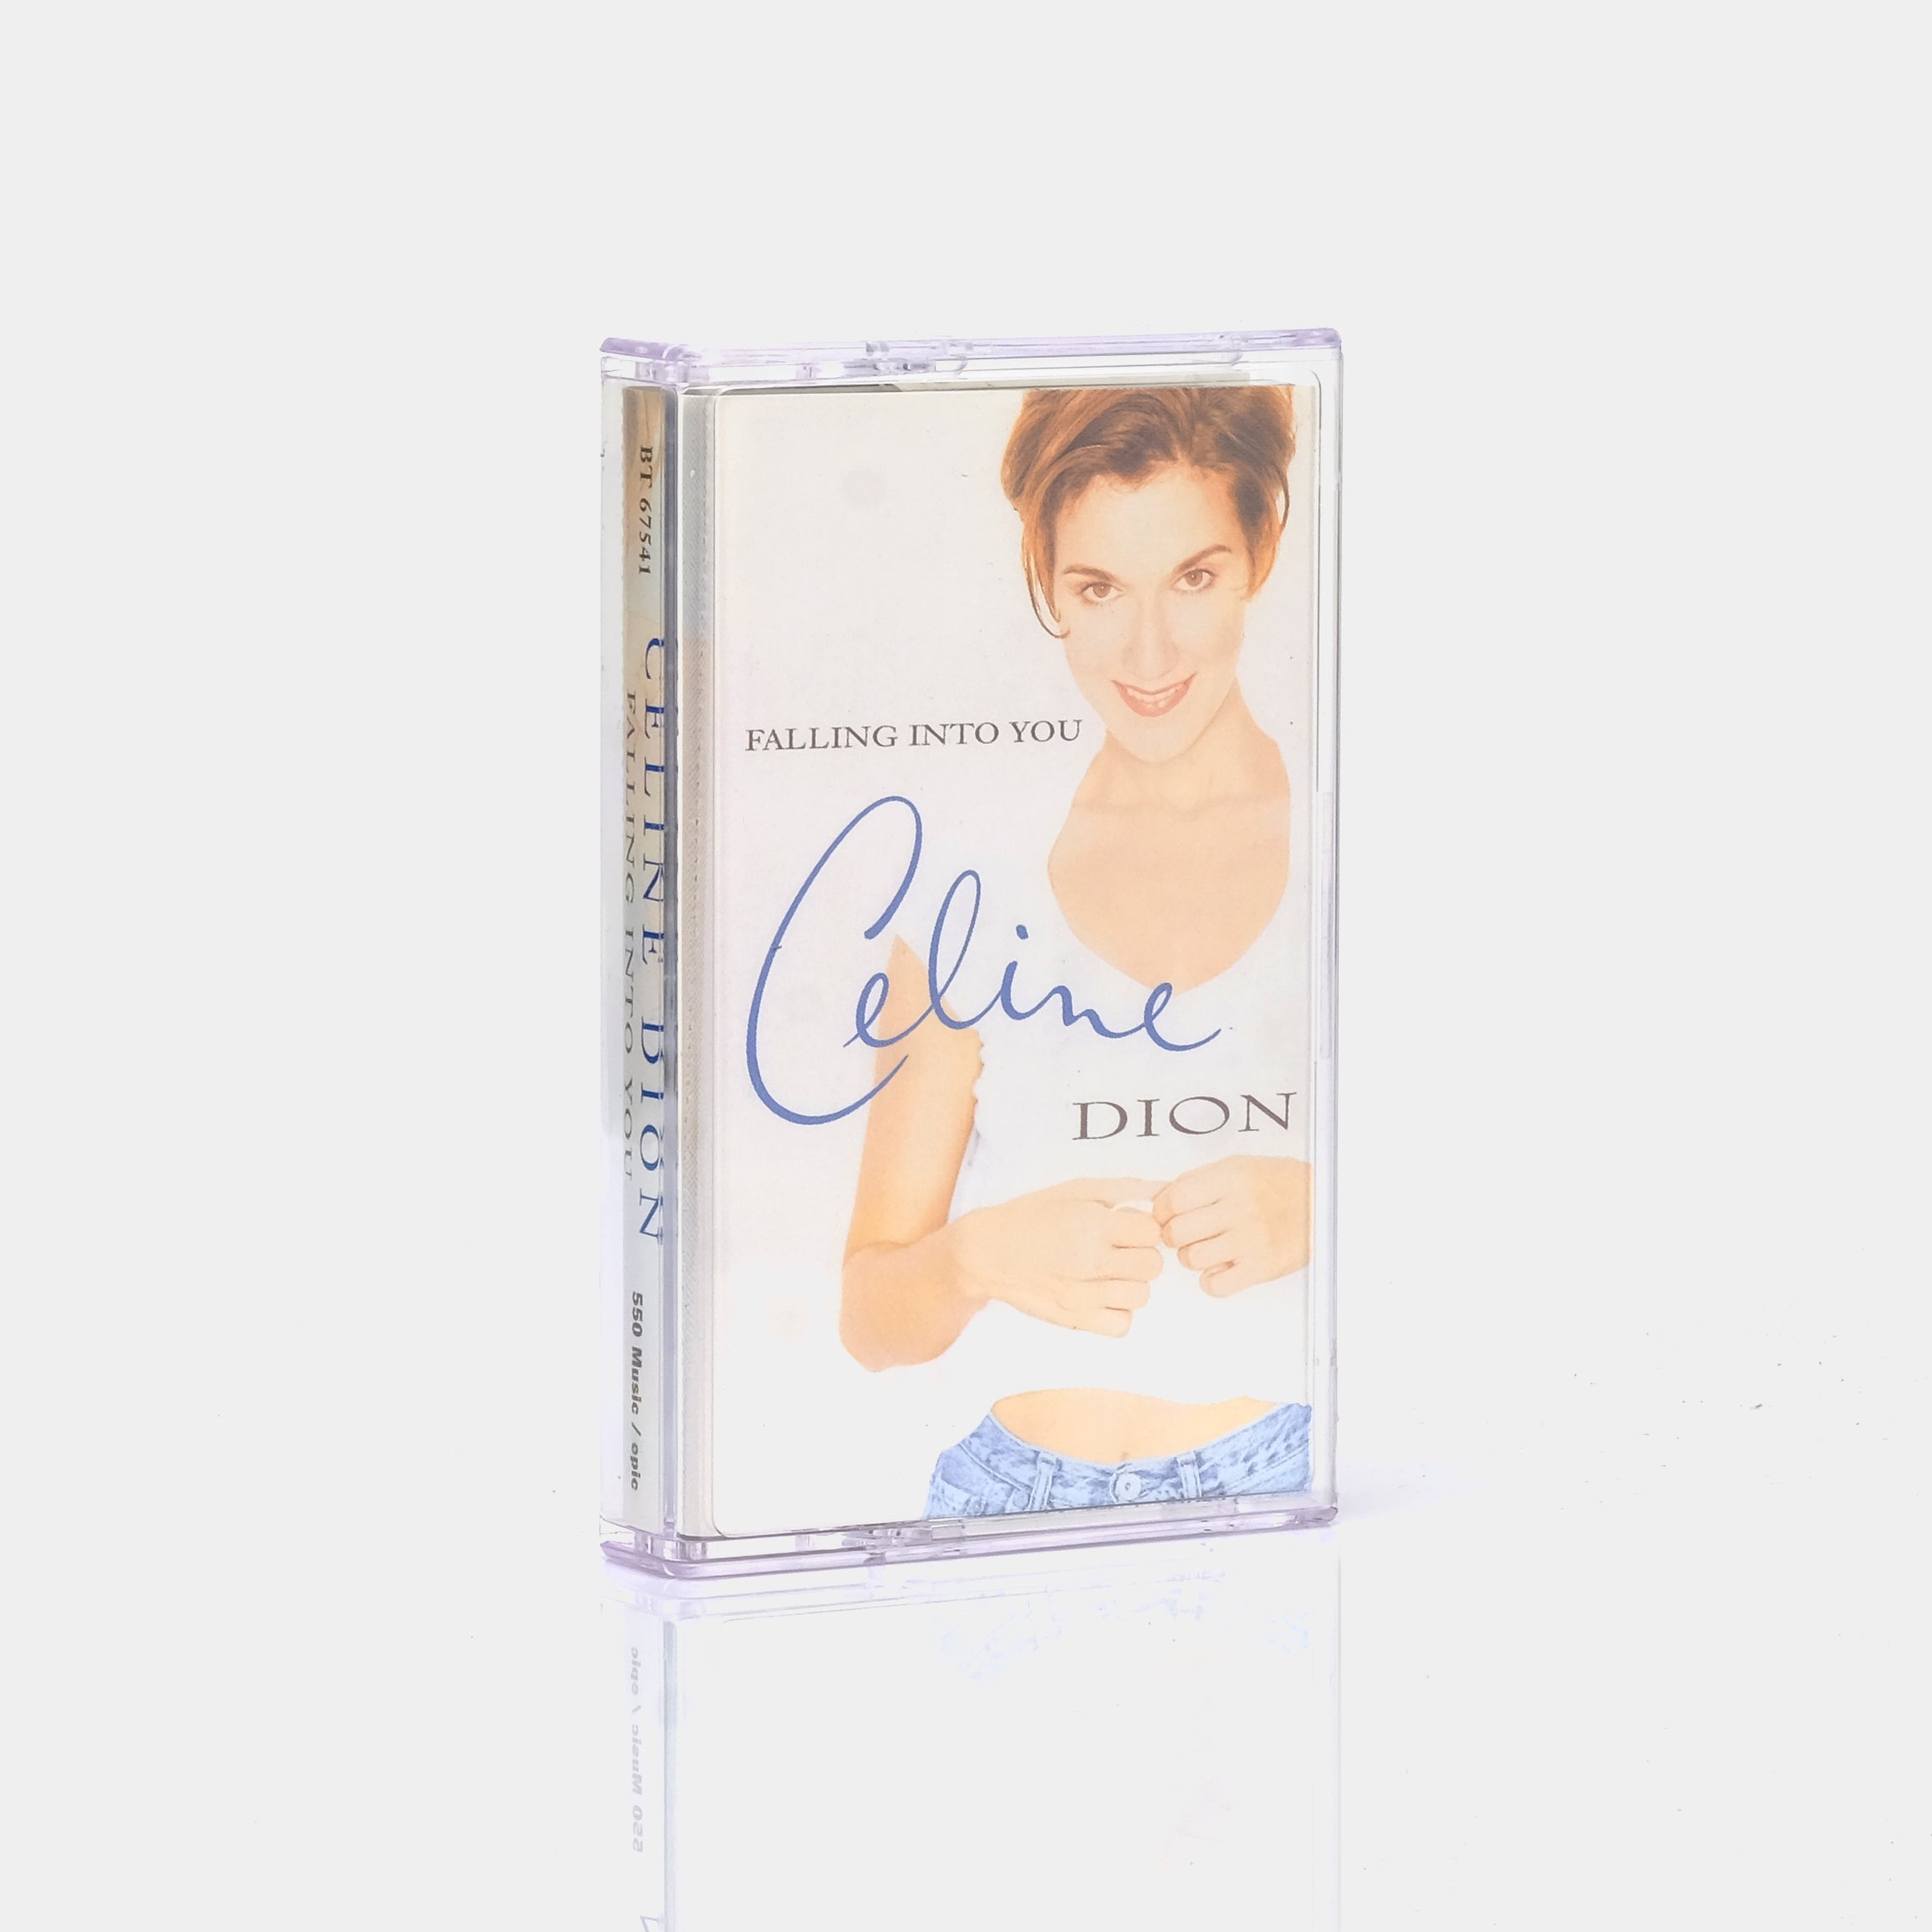 Celine Dion - Falling Into You Cassette Tape